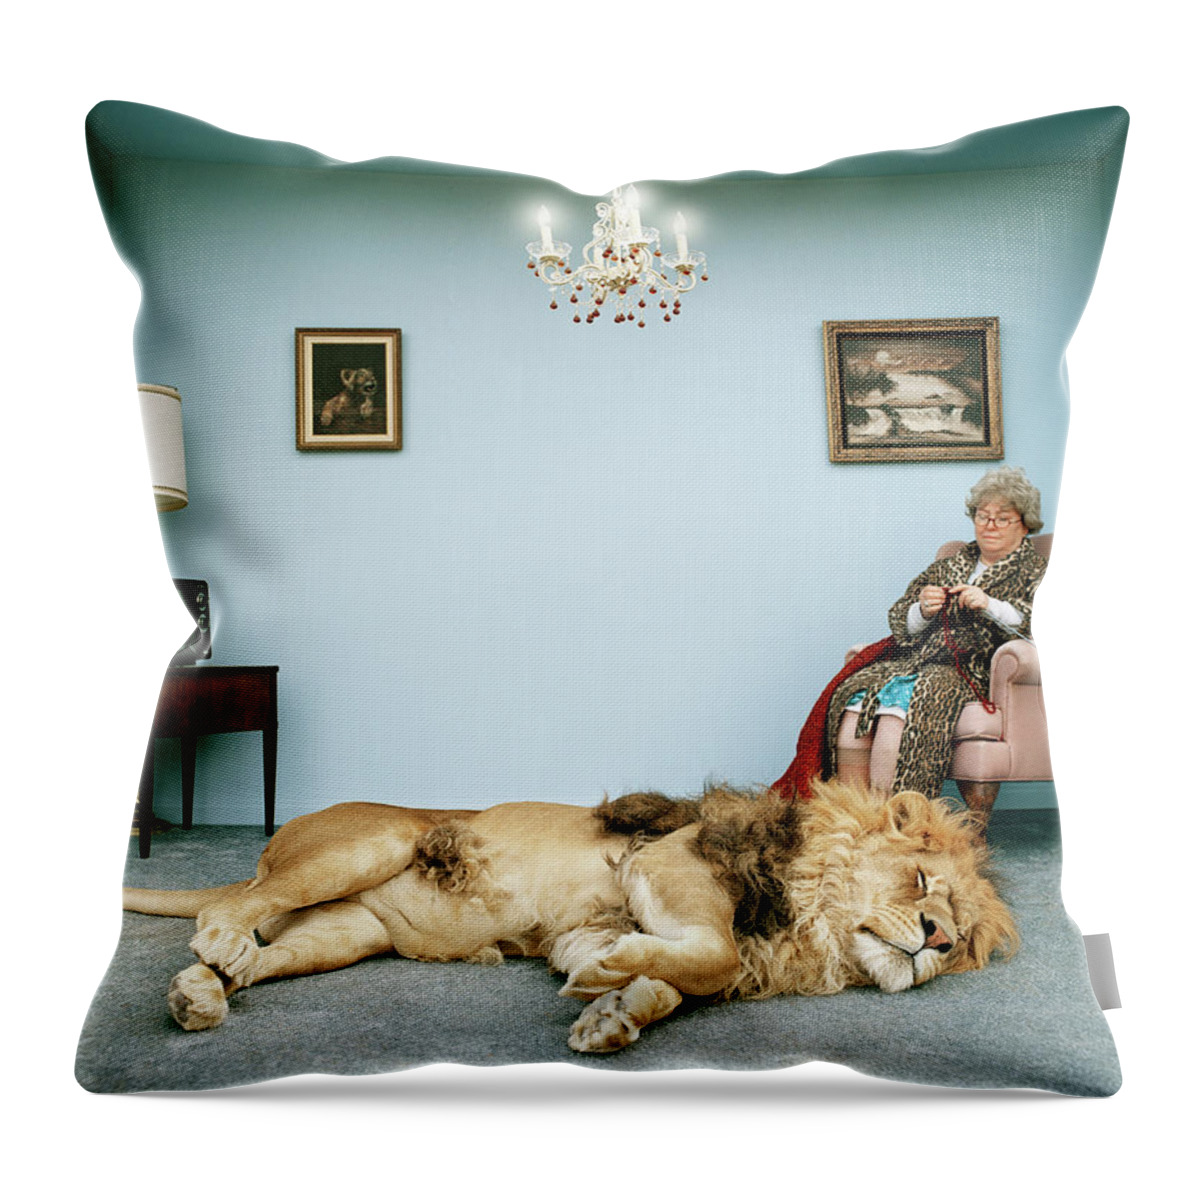 Pets Throw Pillow featuring the photograph Lion Lying On Rug, Mature Woman Knitting by Matthias Clamer